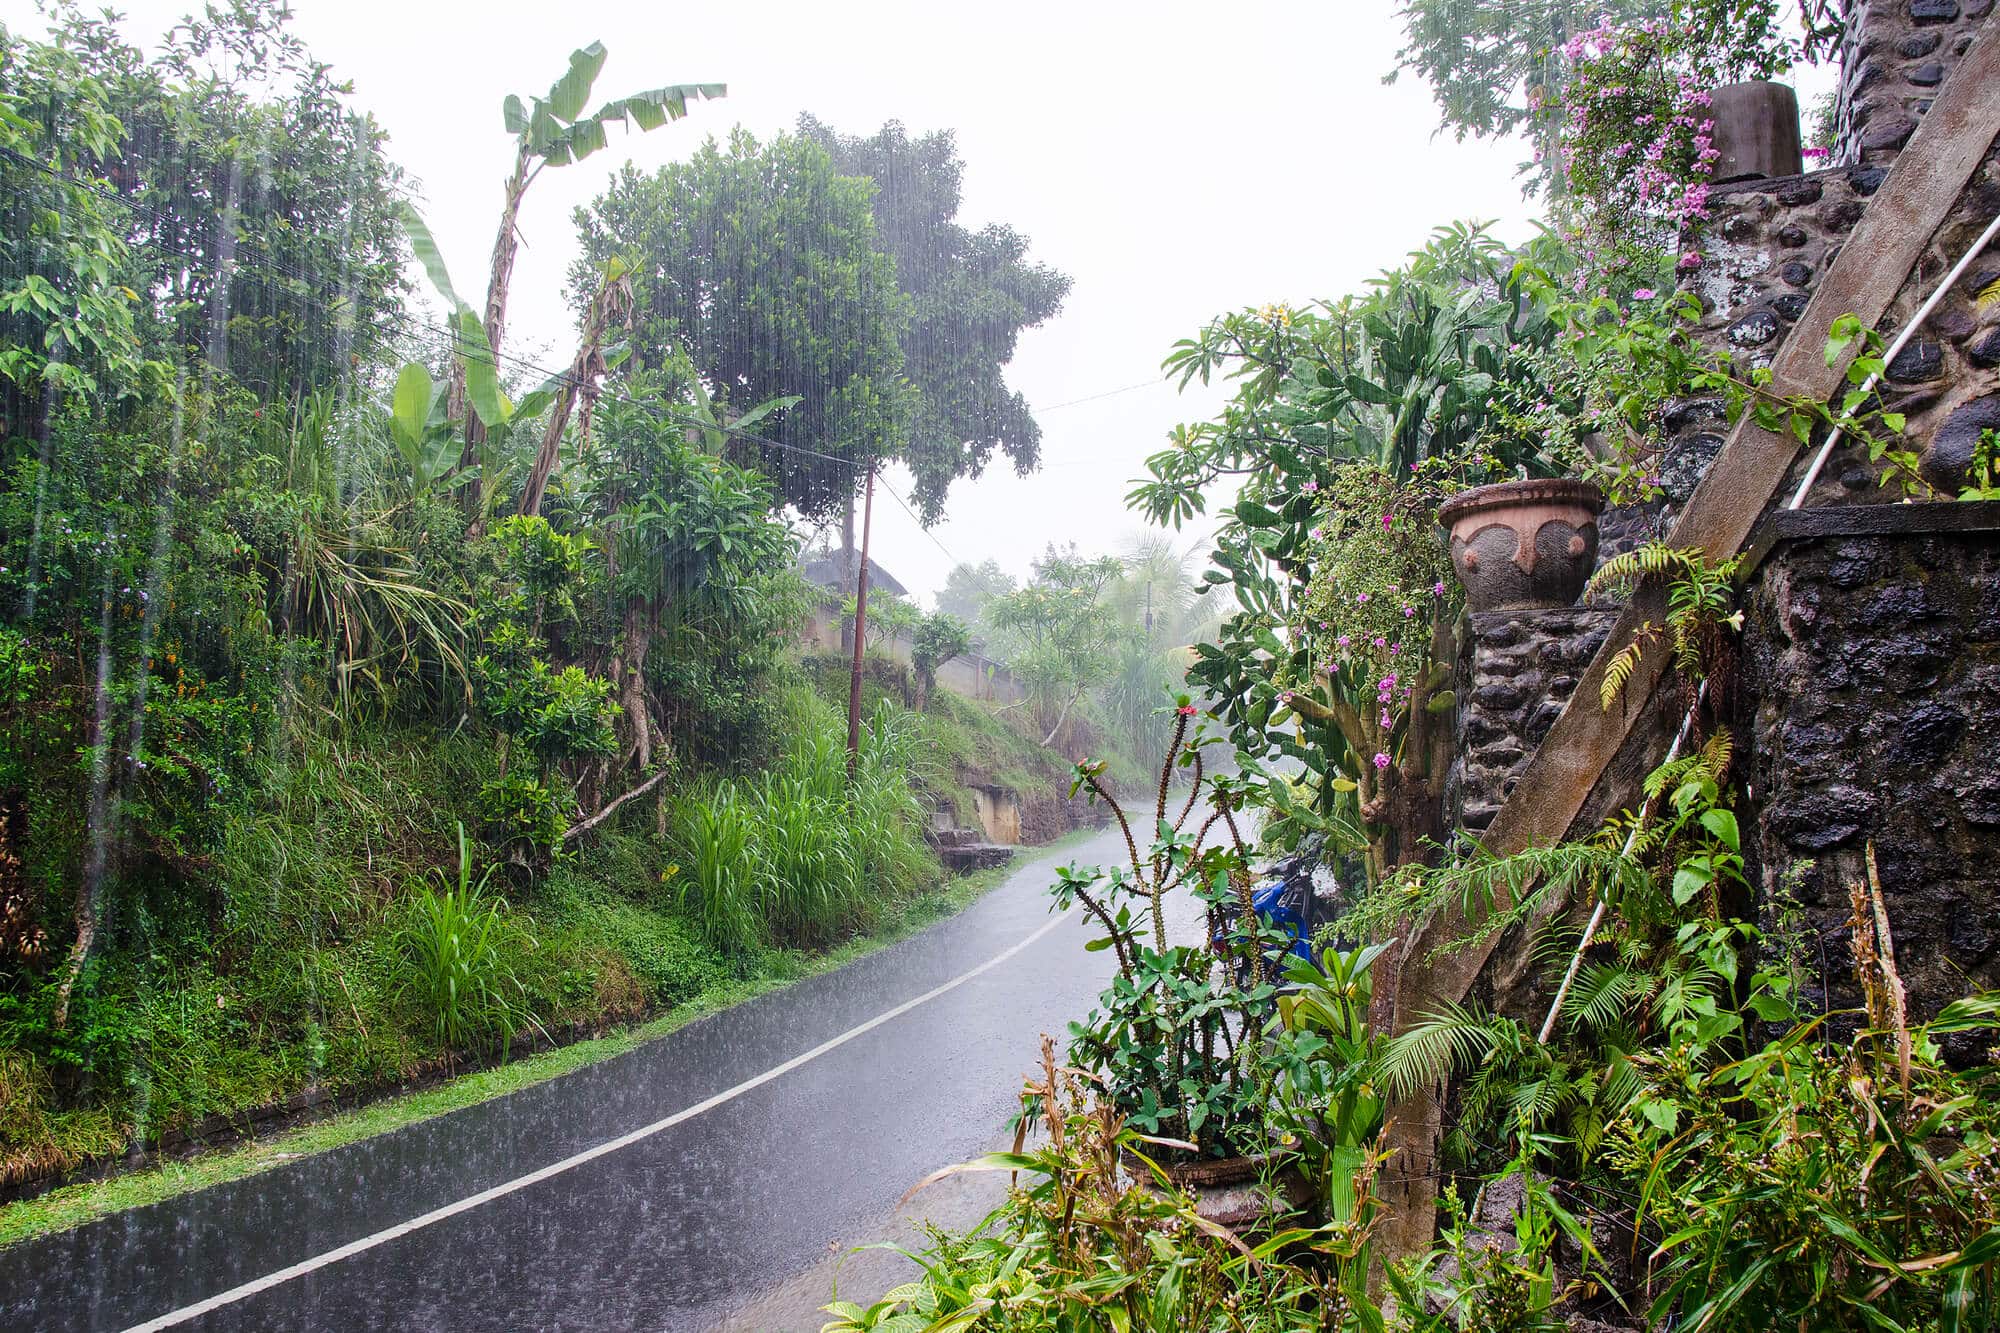 Rainy street in Bali with lush greenery on both sides.